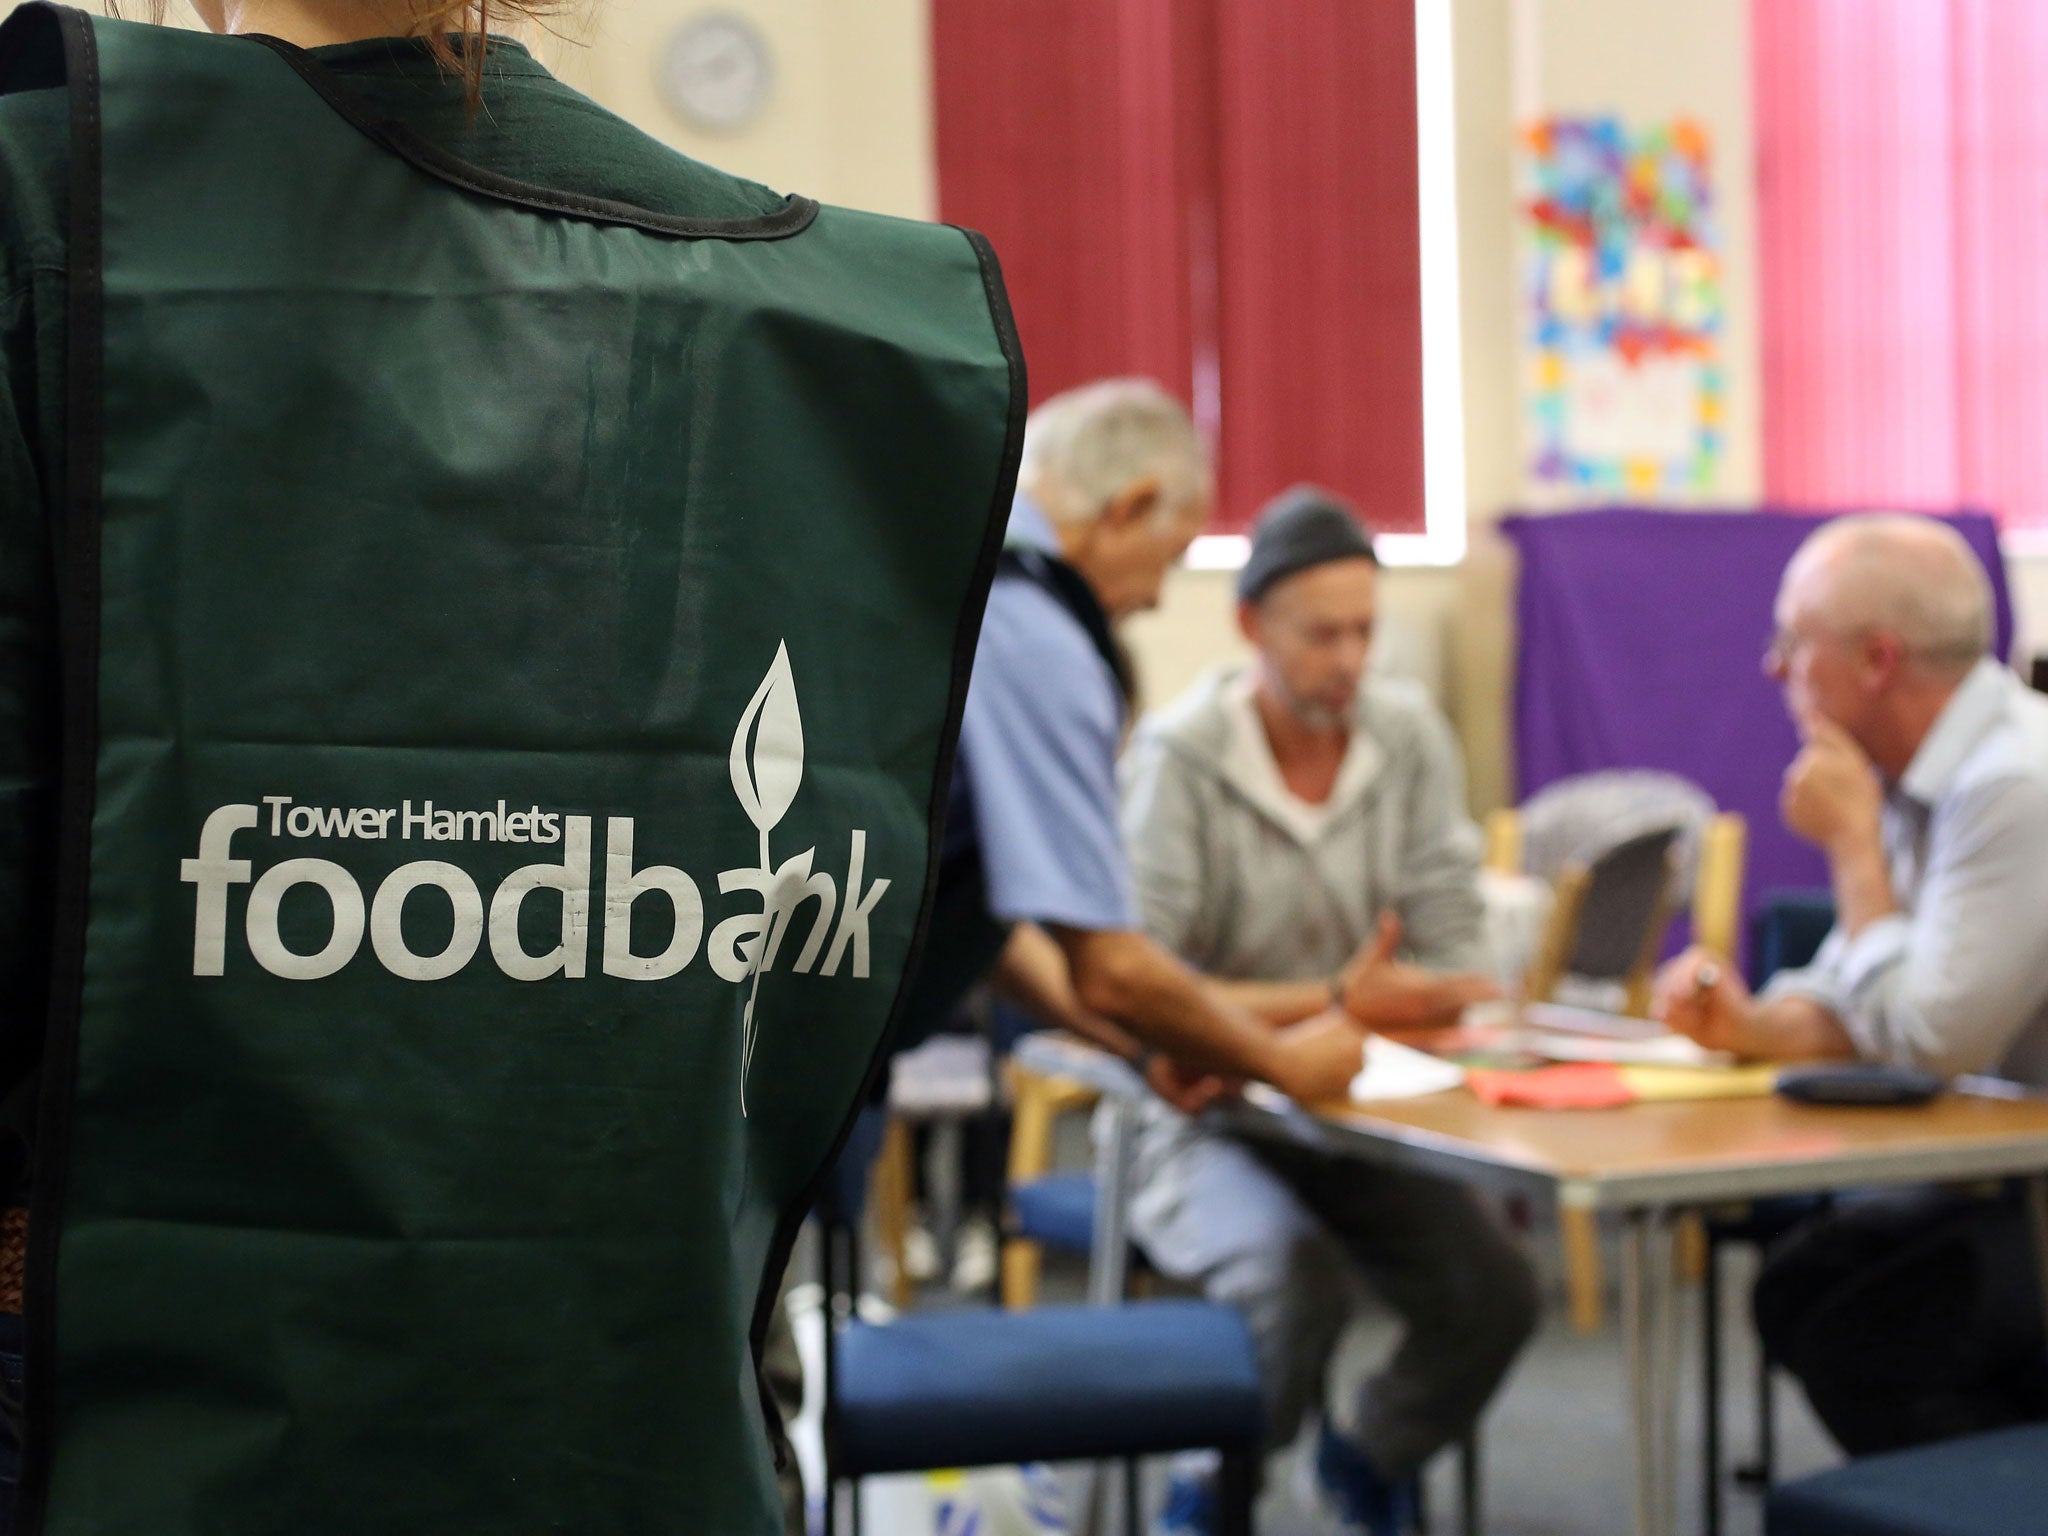 General view of workers pictured in the Tower Hamlets food bank Poplar branch